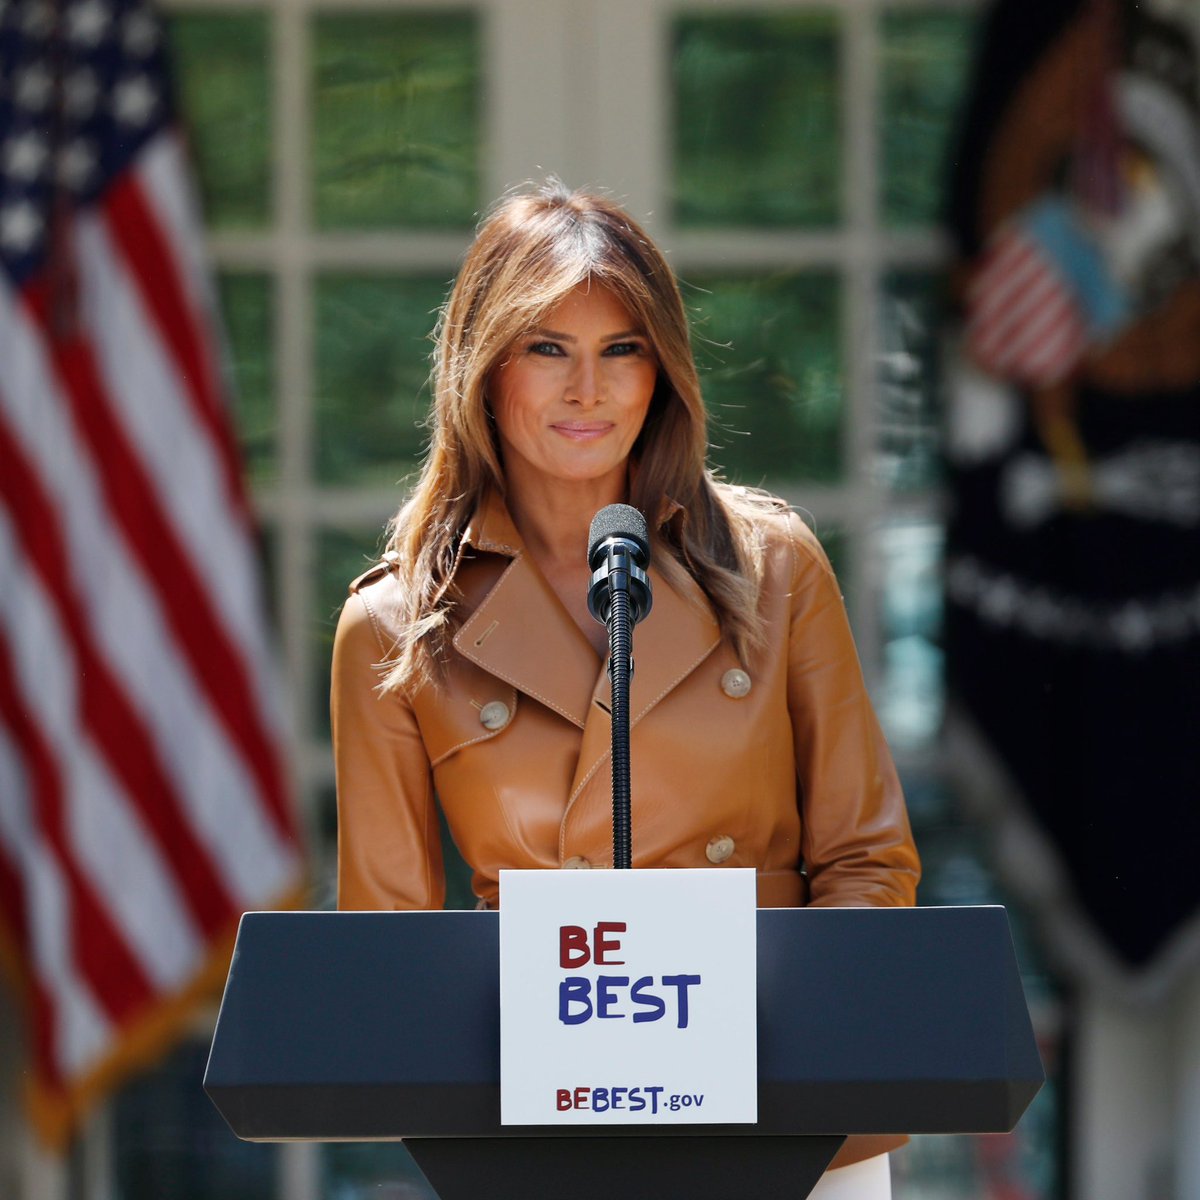 6 years ago today, Melania Trump launched her BE BEST initiative. ❤️🤍💙
#BeBest
#FosteringTheFuture
#NationalFosterCareMonth